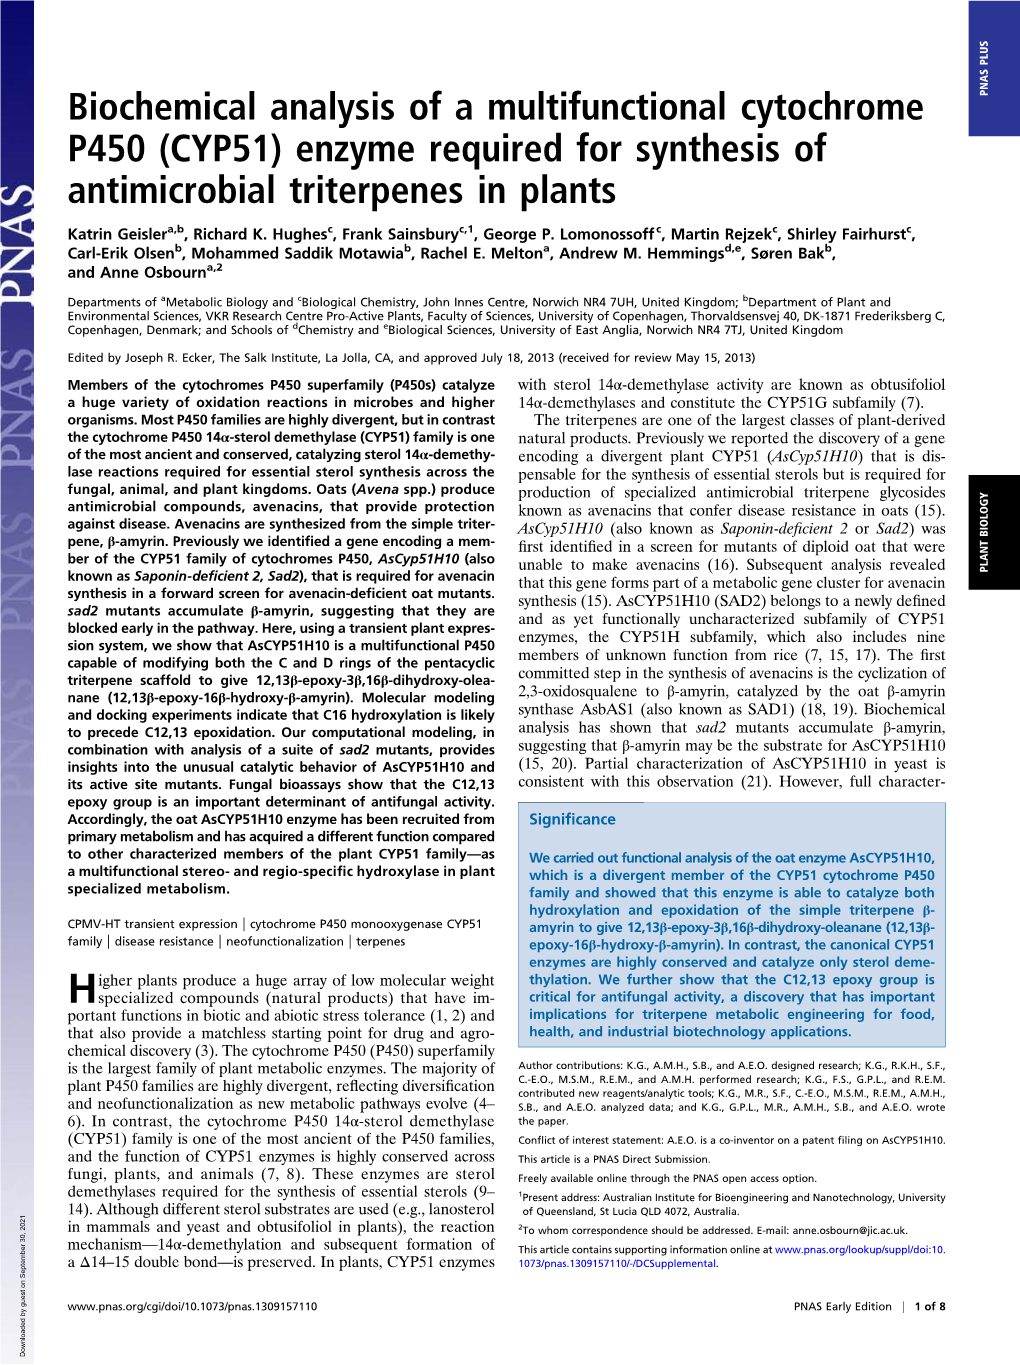 CYP51) Enzyme Required for Synthesis of Antimicrobial Triterpenes in Plants